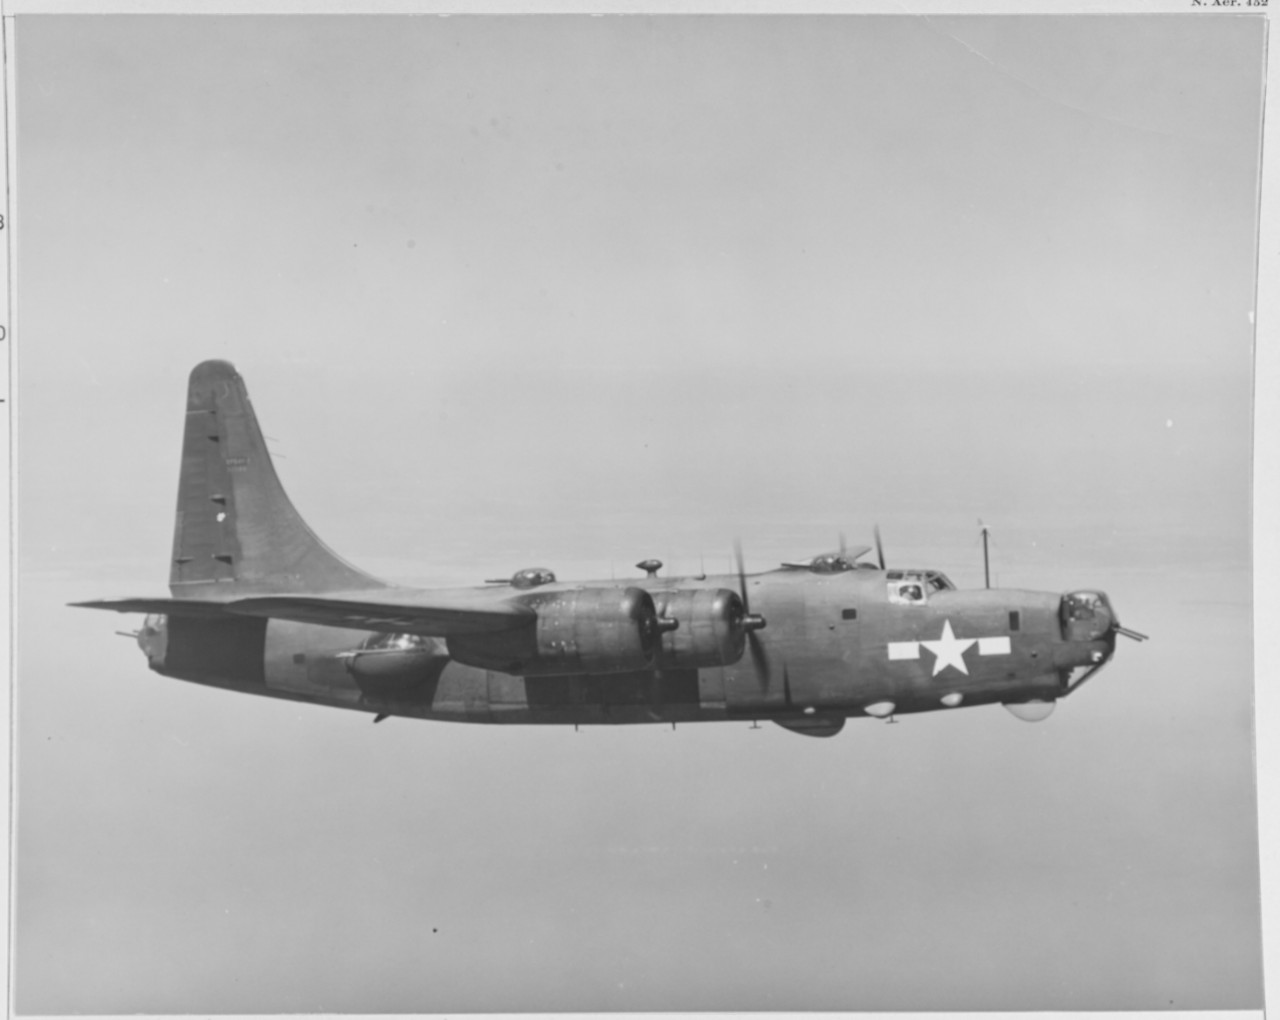 3 July 1944 - The first XPB4Y-2 (BUNO 32086), single tailed conversion of a production B-24D Army heavy bomber specifically altered to suit Navy patrol-bomber requirements. It made its first flight 20 September 1943 and the first production contract followed by a month. Twelve .50 caliber machine guns are carried in twin turrets and two twin waist mounts. ECM gear is carried in faired housings under the nose and cockpit, while the larger fairing beneath the forward dorsal turret contains AN/APS-15 ("Mickey") bombing radar, used successfully for "blind" bombing by the Eighth Air Force over Europe.